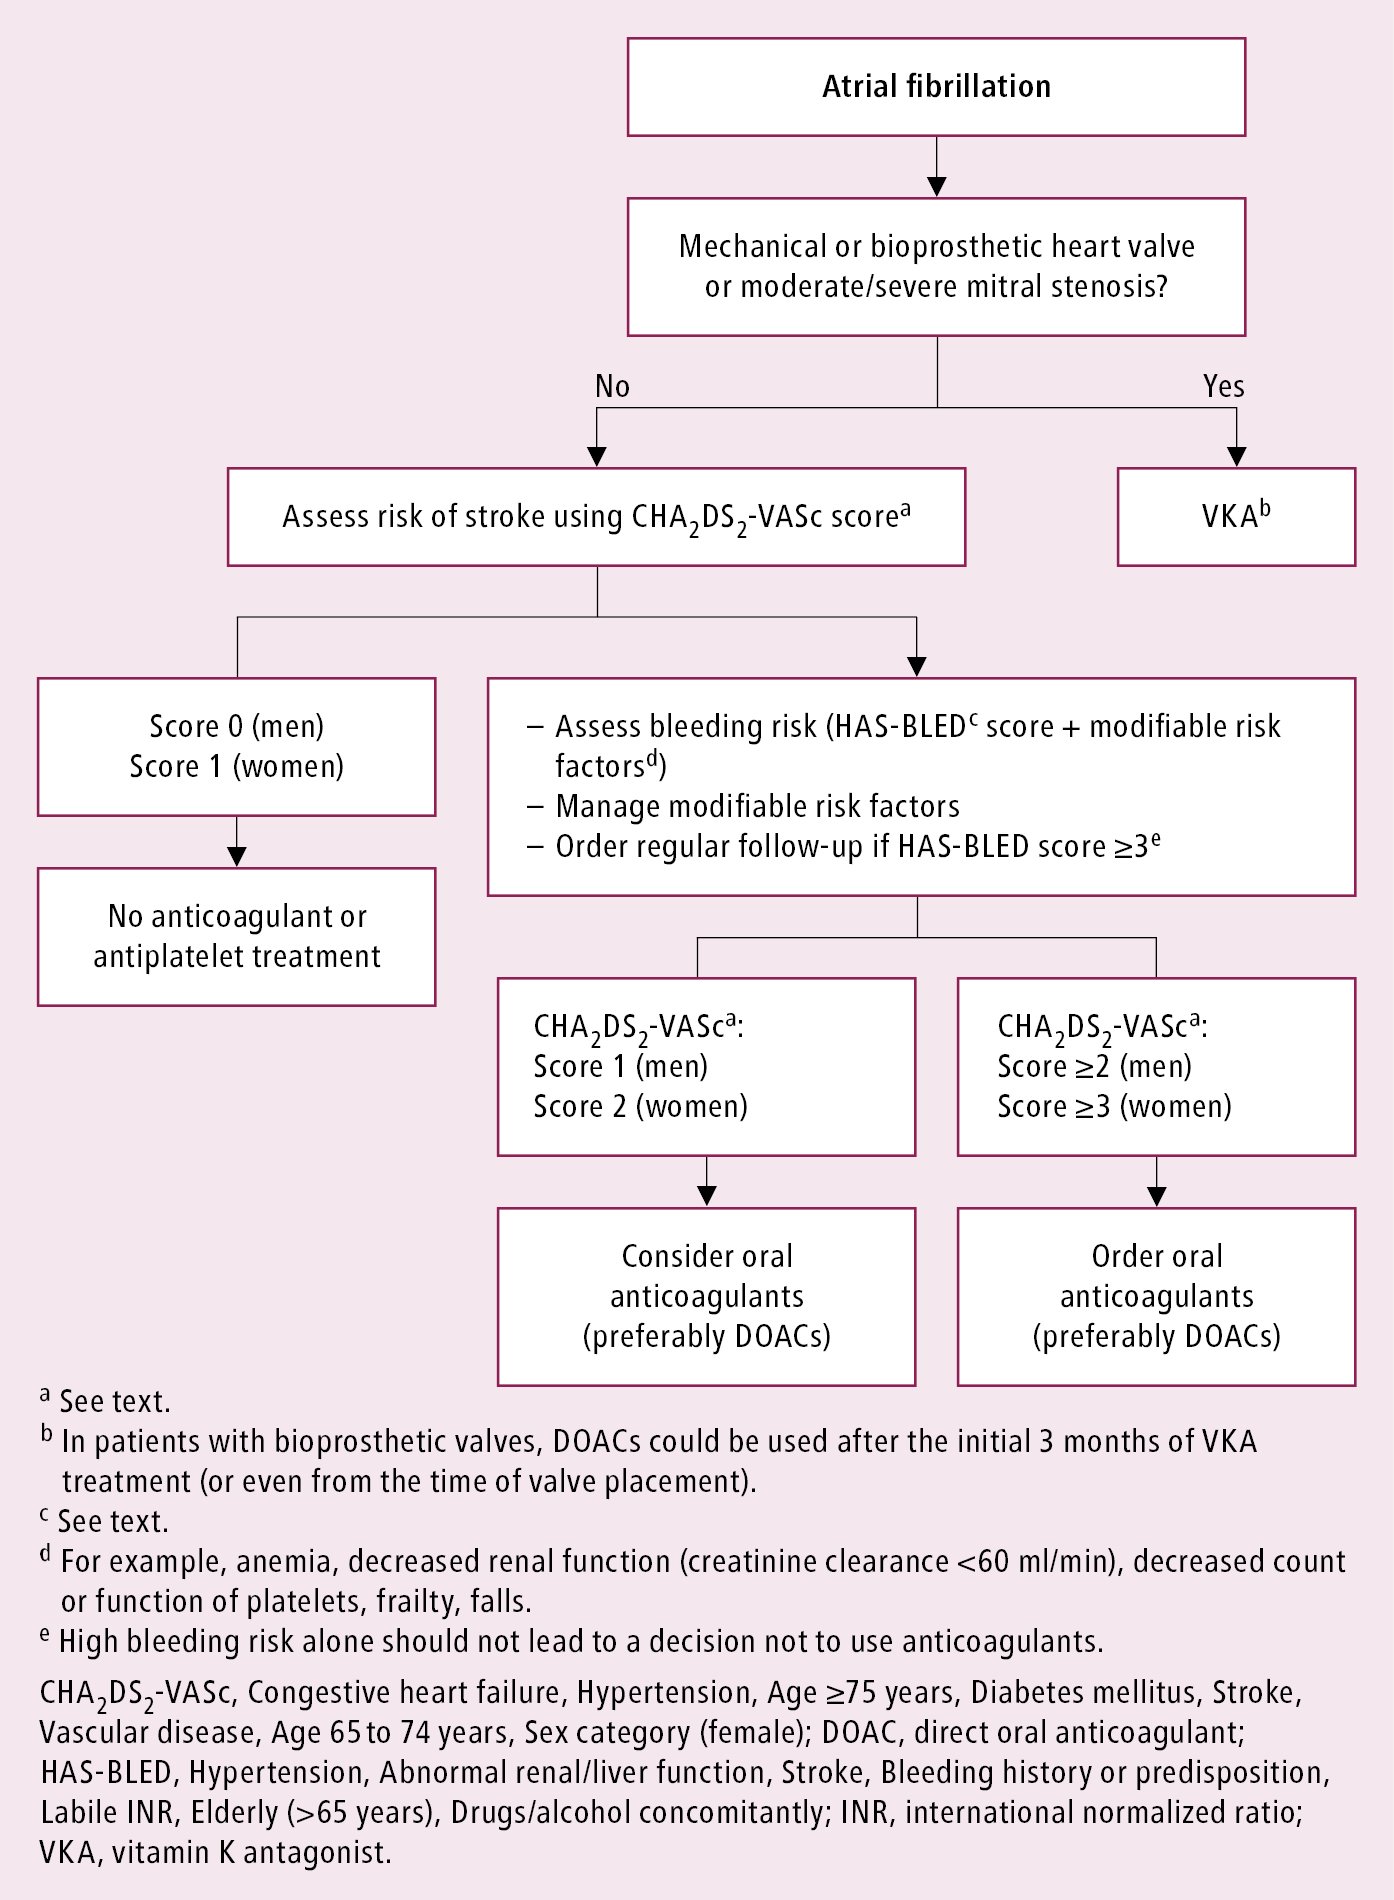 Figure 031_1195.  Algorithm for prevention of thromboembolism in patients with atrial fibrillation.  Adapted from the 2020 European Society of Cardiology guidelines.  